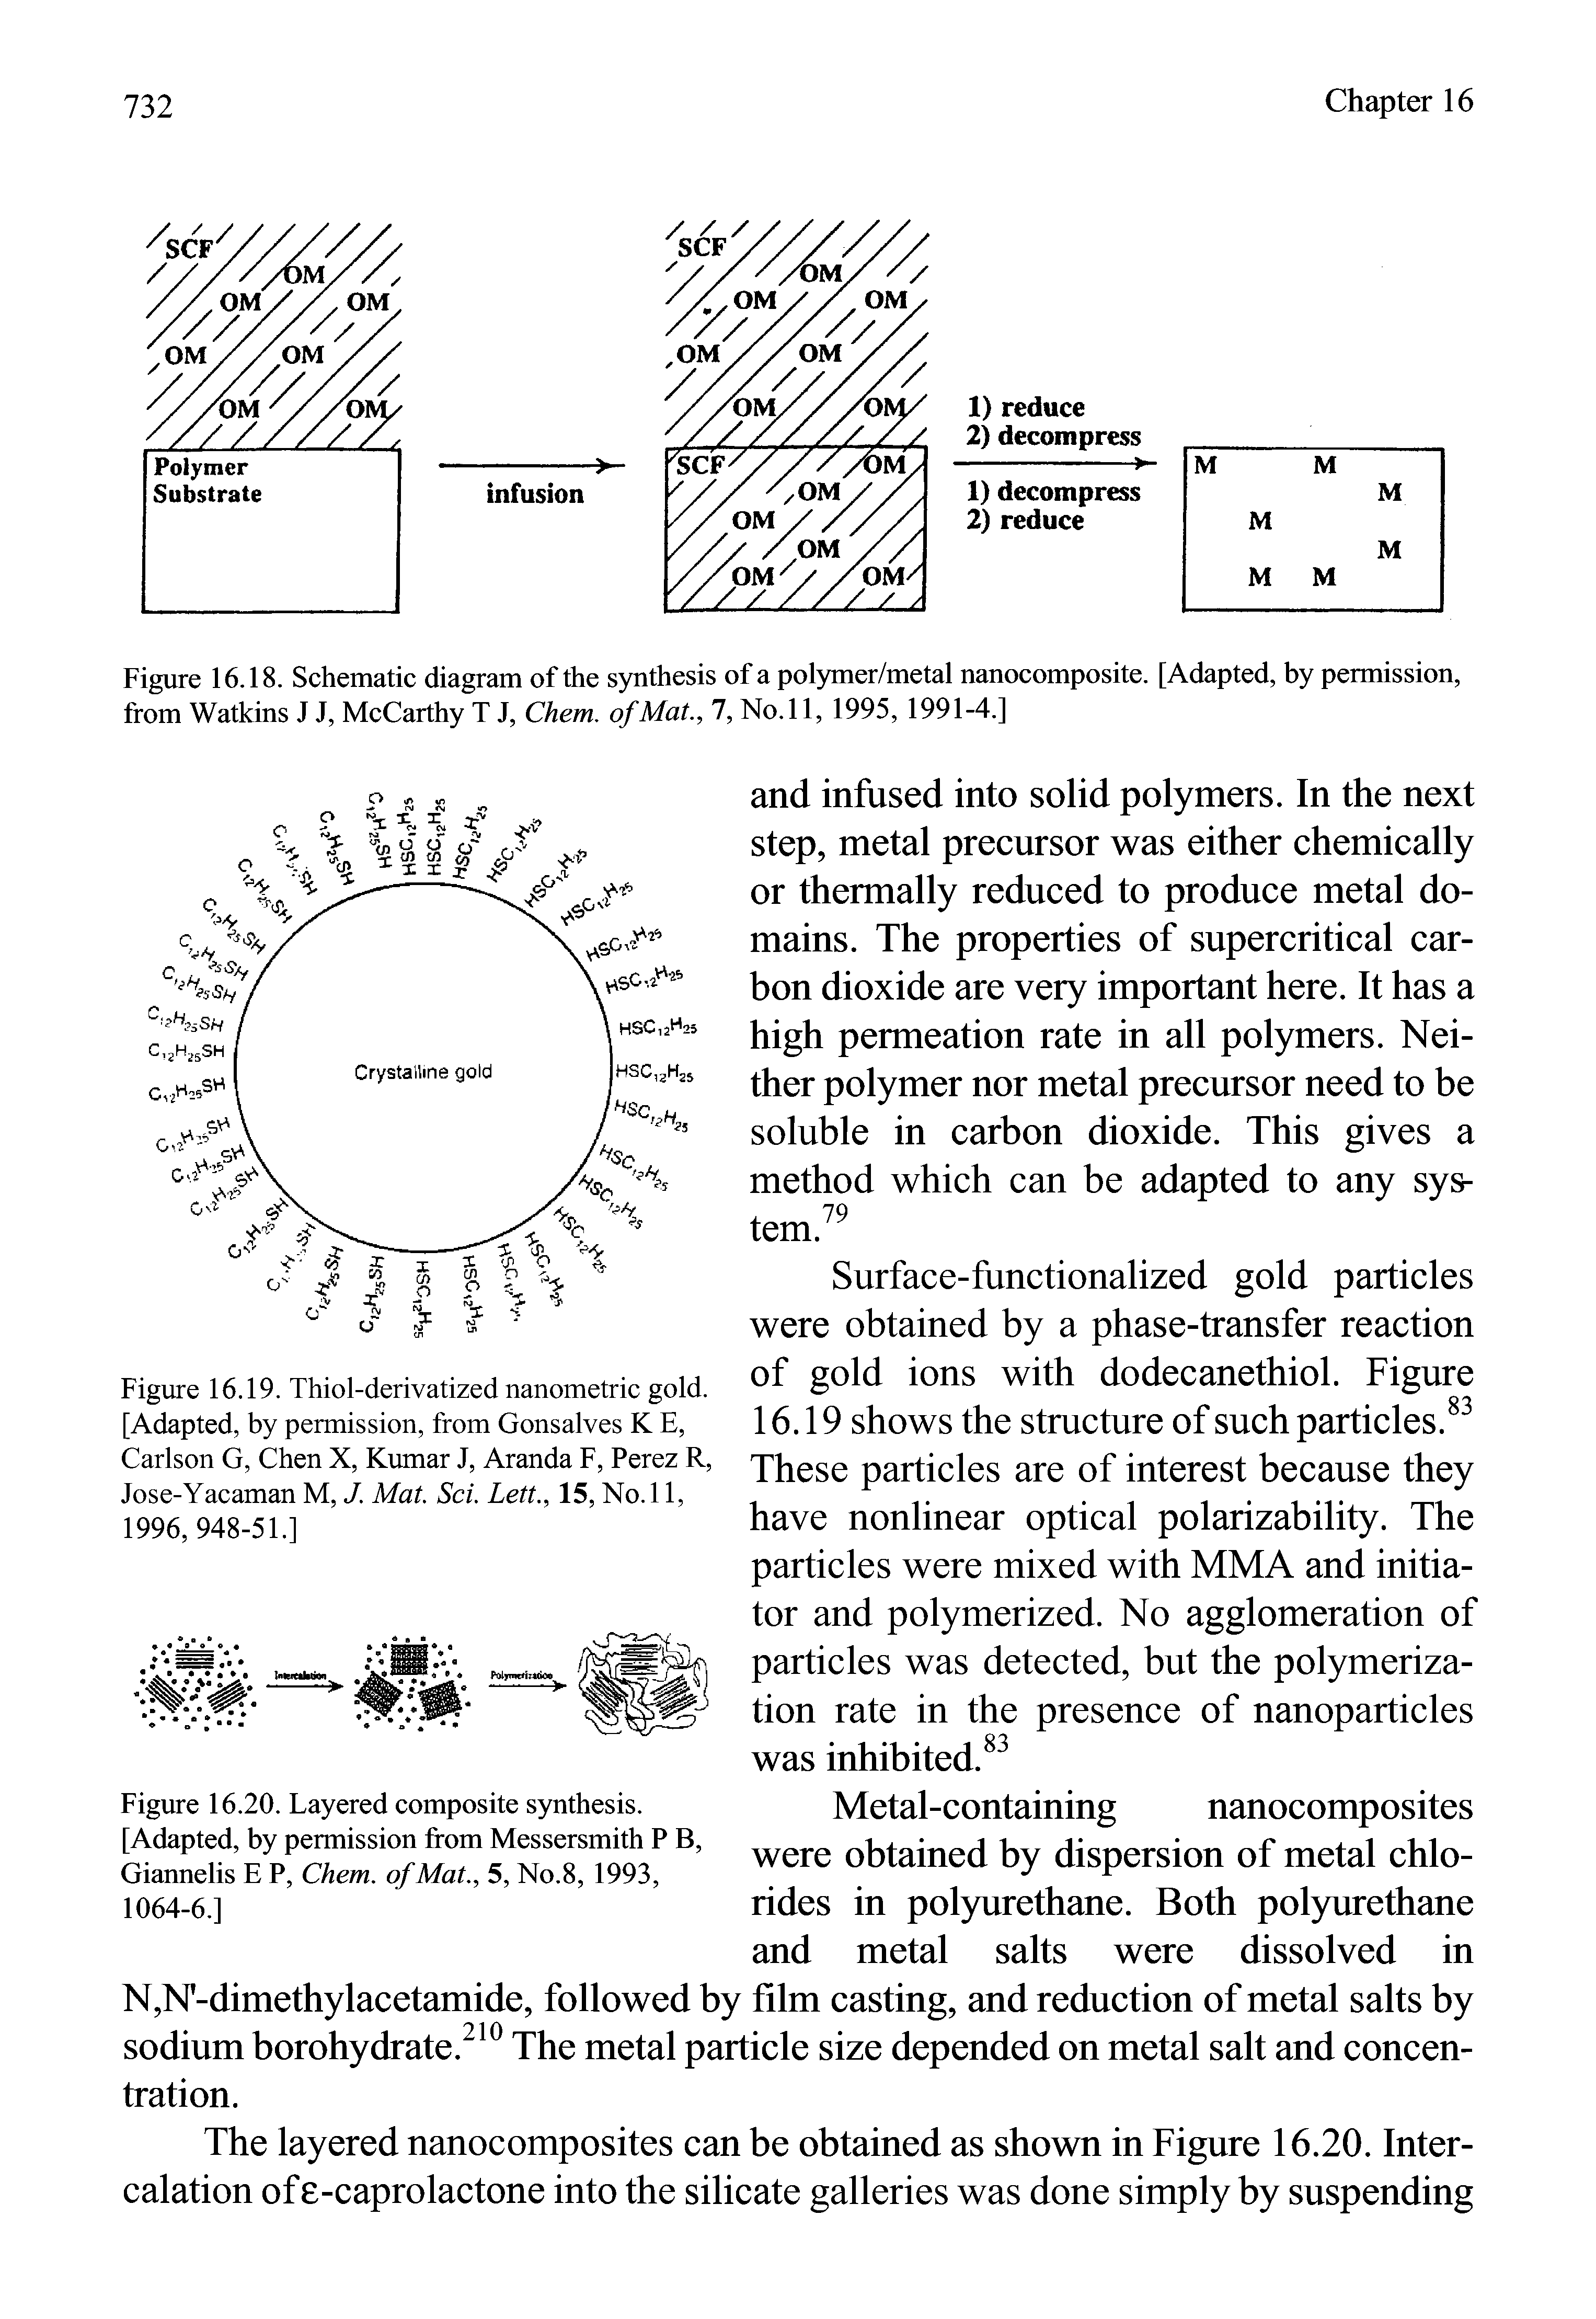 Figure 16.18. Schematic diagram of the synthesis of a polymer/metal nanocomposite. [Adapted, by permission, from Watkins J J, McCarthy T J, Chem. of Mat., 7, No.ll, 1995, 1991-4.]...